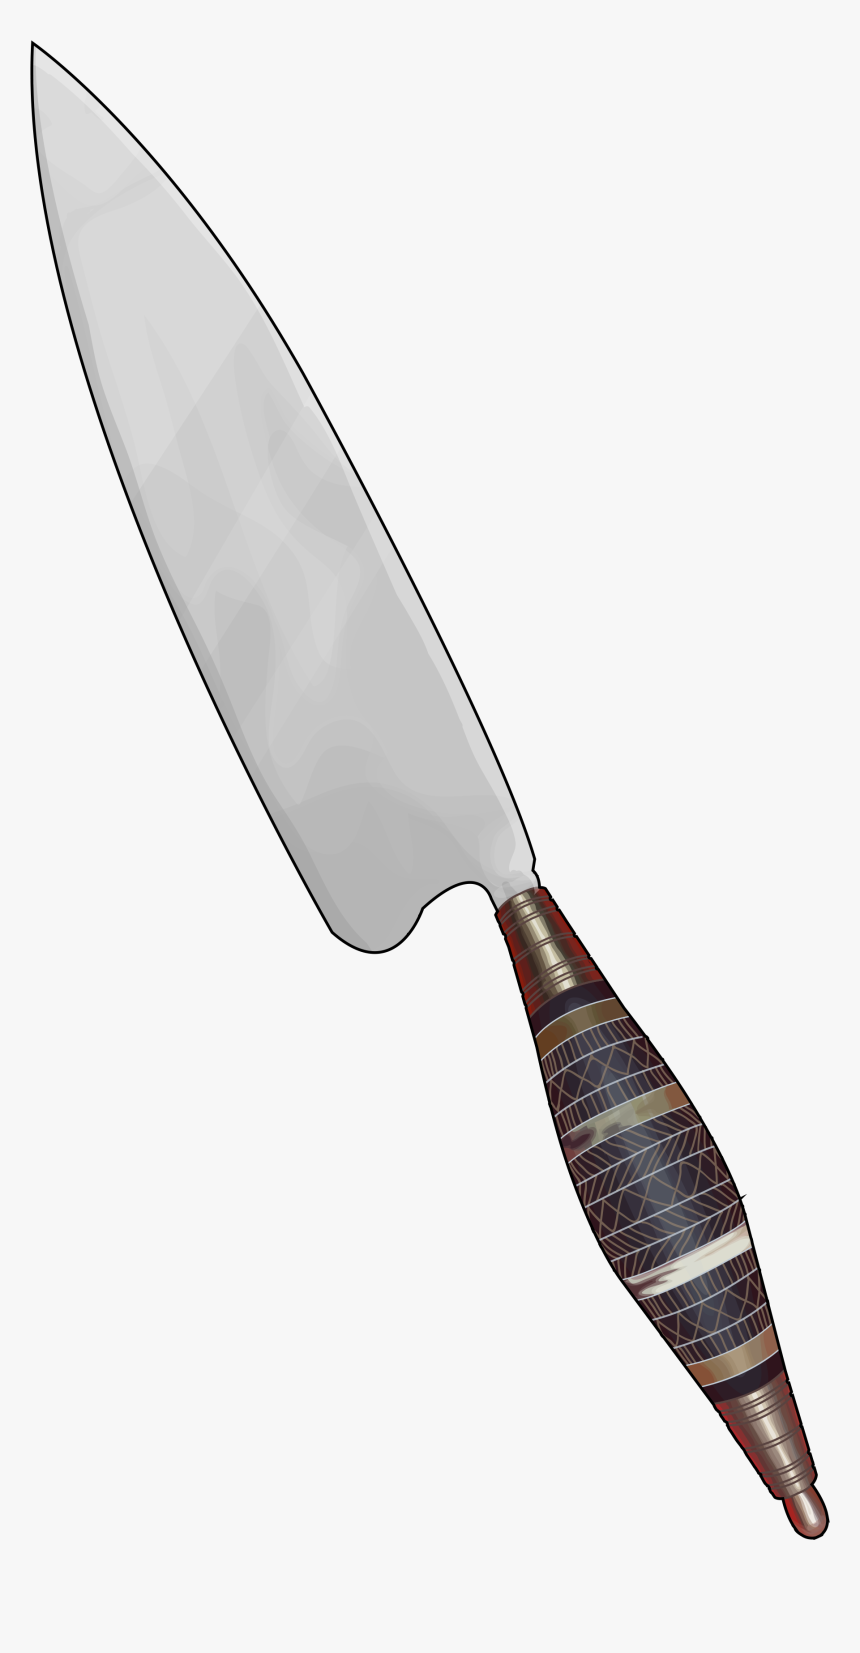 Cuchillo Canario Png, Transparent Png, Free Download